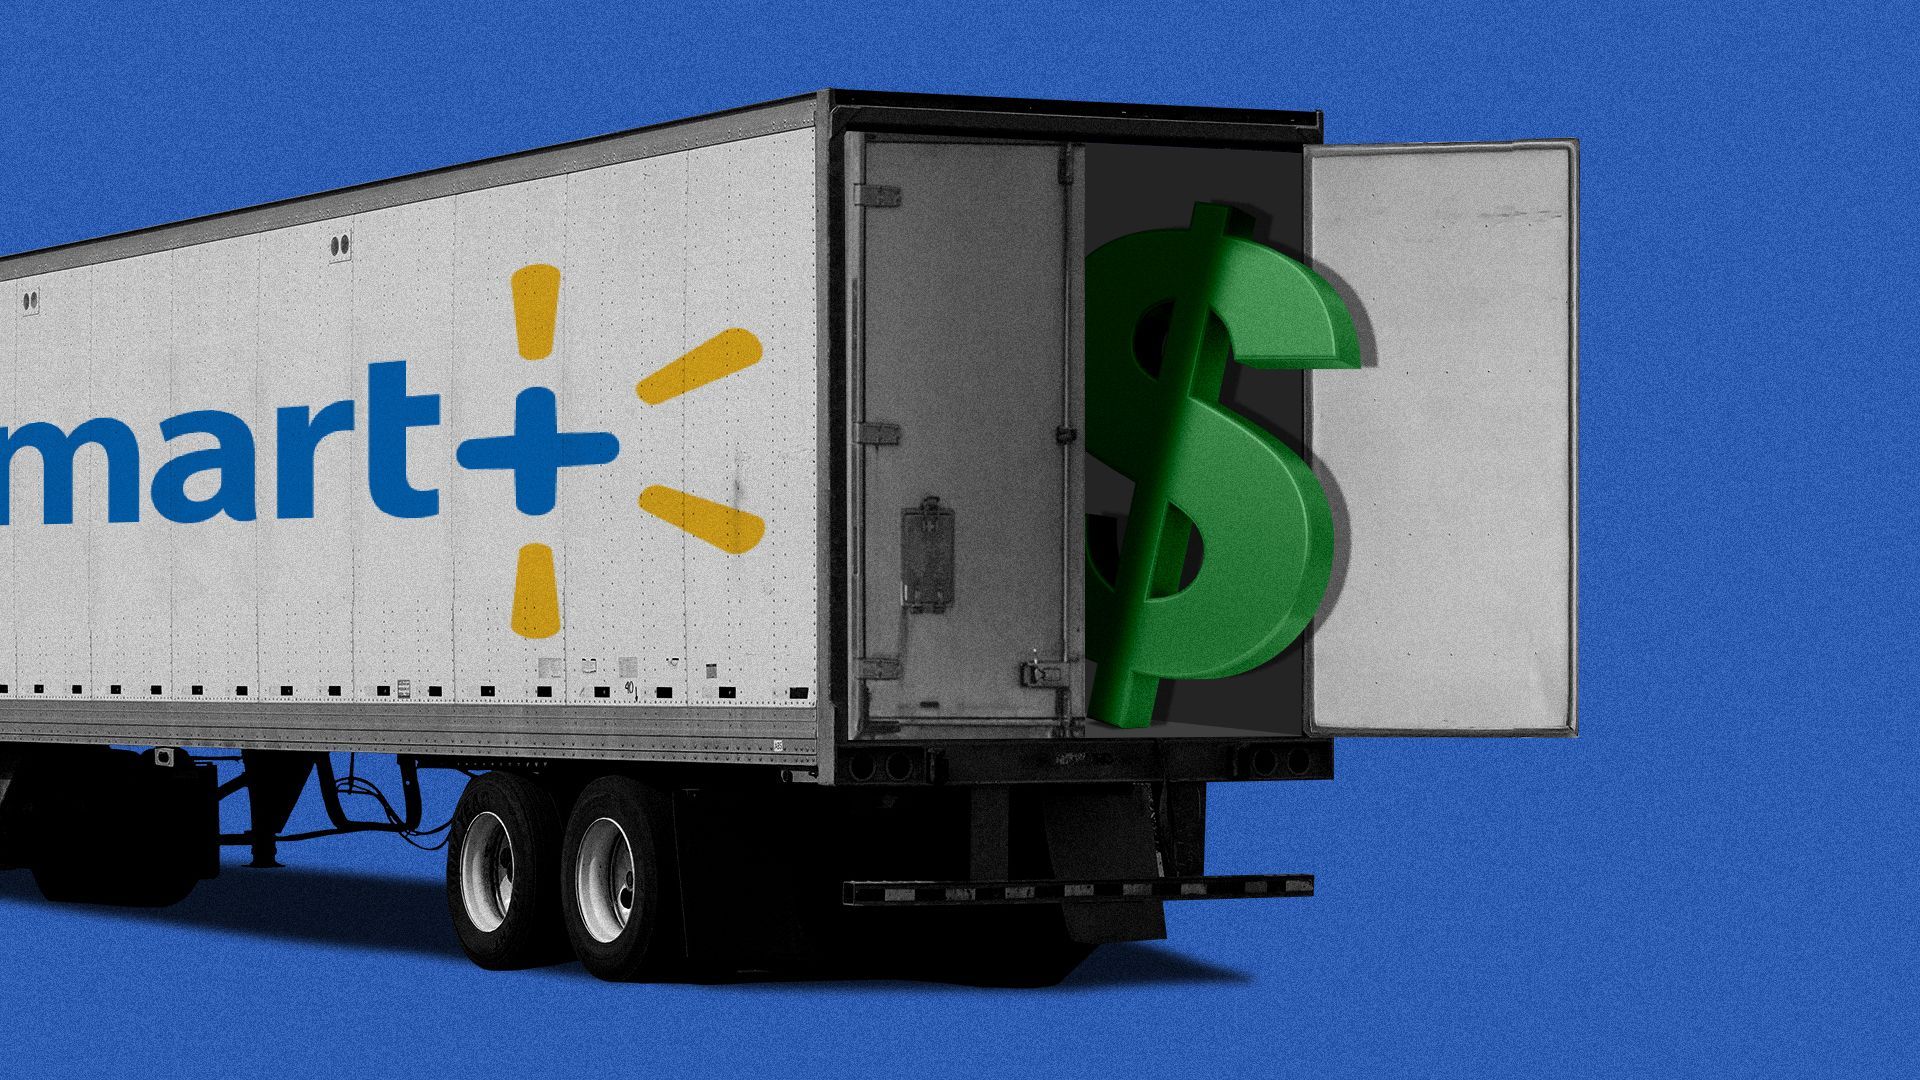 Illustration of a dollar sign peeking out of a tractor trailer.